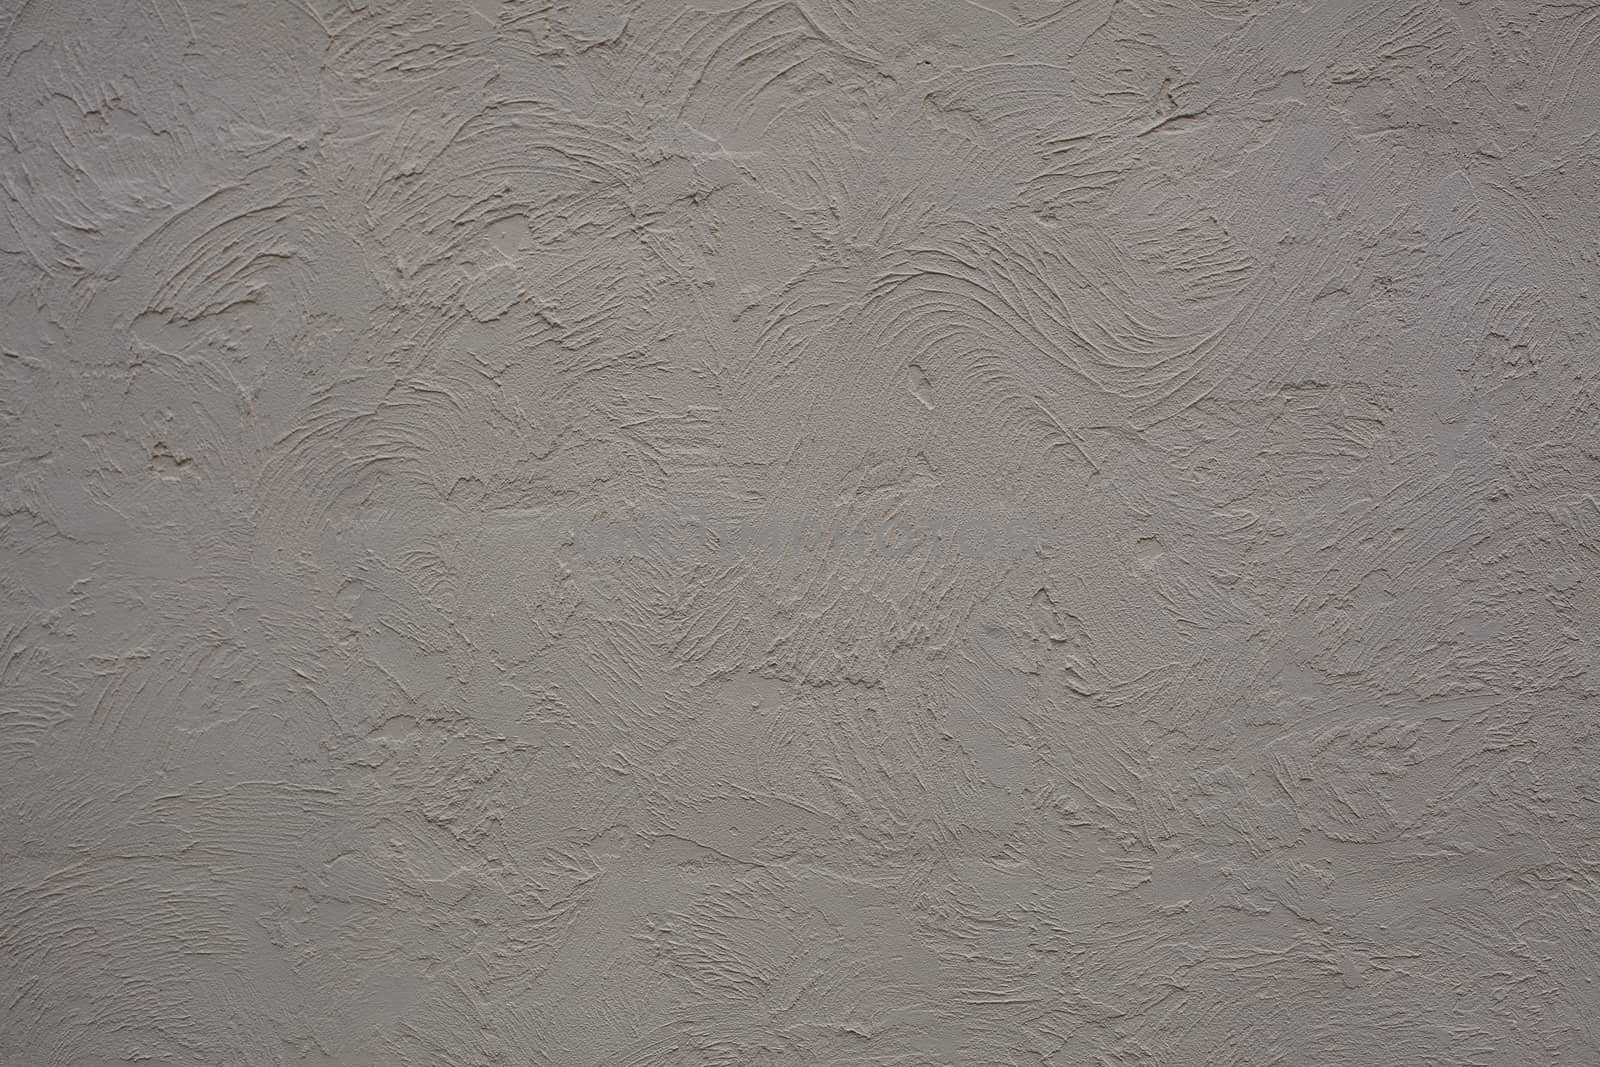 Texture of plastered wall by Angorius